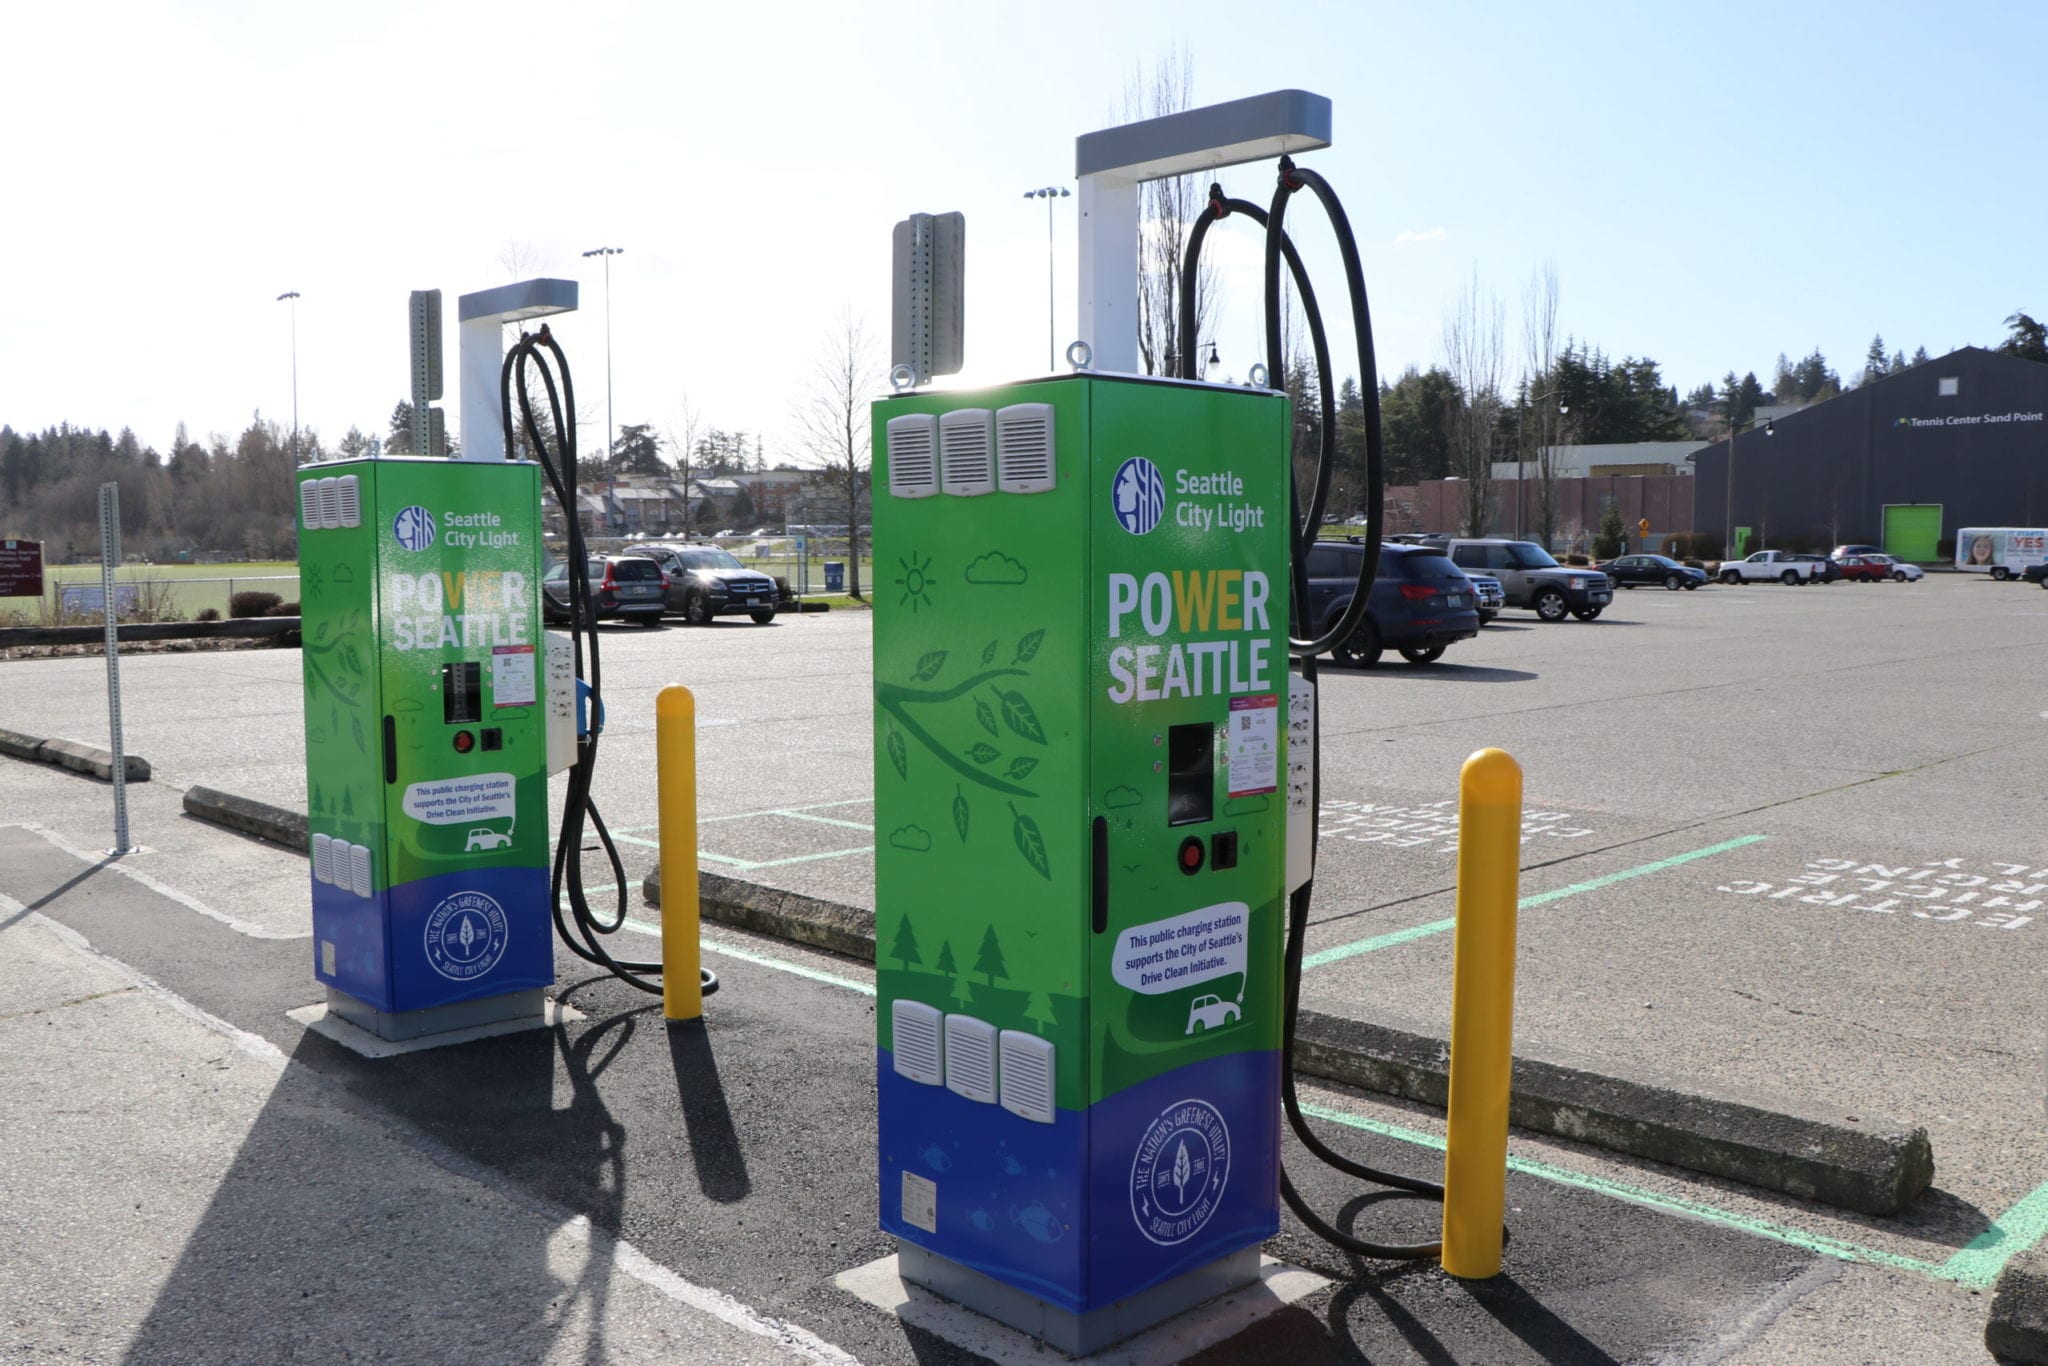 City Light Announces New Electric Vehicle Fast Chargers in Seattle